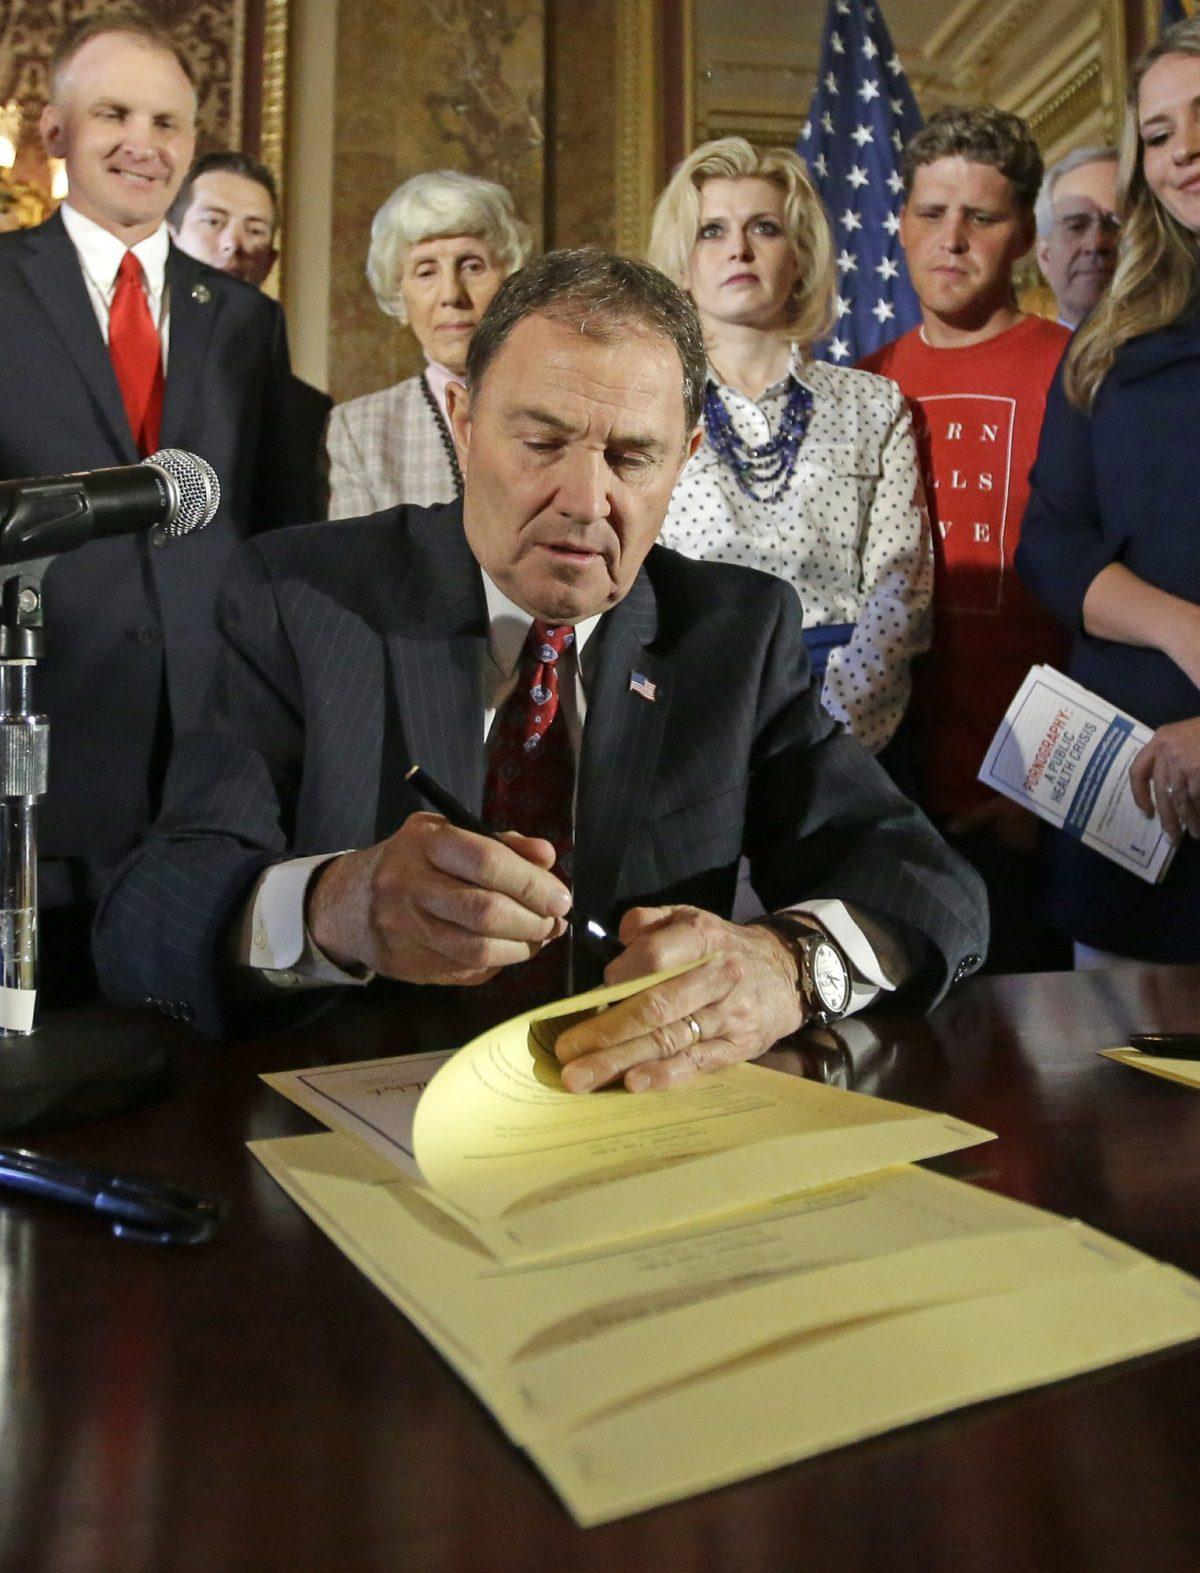 Utah Gov. Gary Herbert looks up during a ceremonial signing of a state resolution declaring pornography a public health crisis, at the Utah State Capitol, in Salt Lake City, on April 19, 2016. (Rick Bowmer/AP Photo)